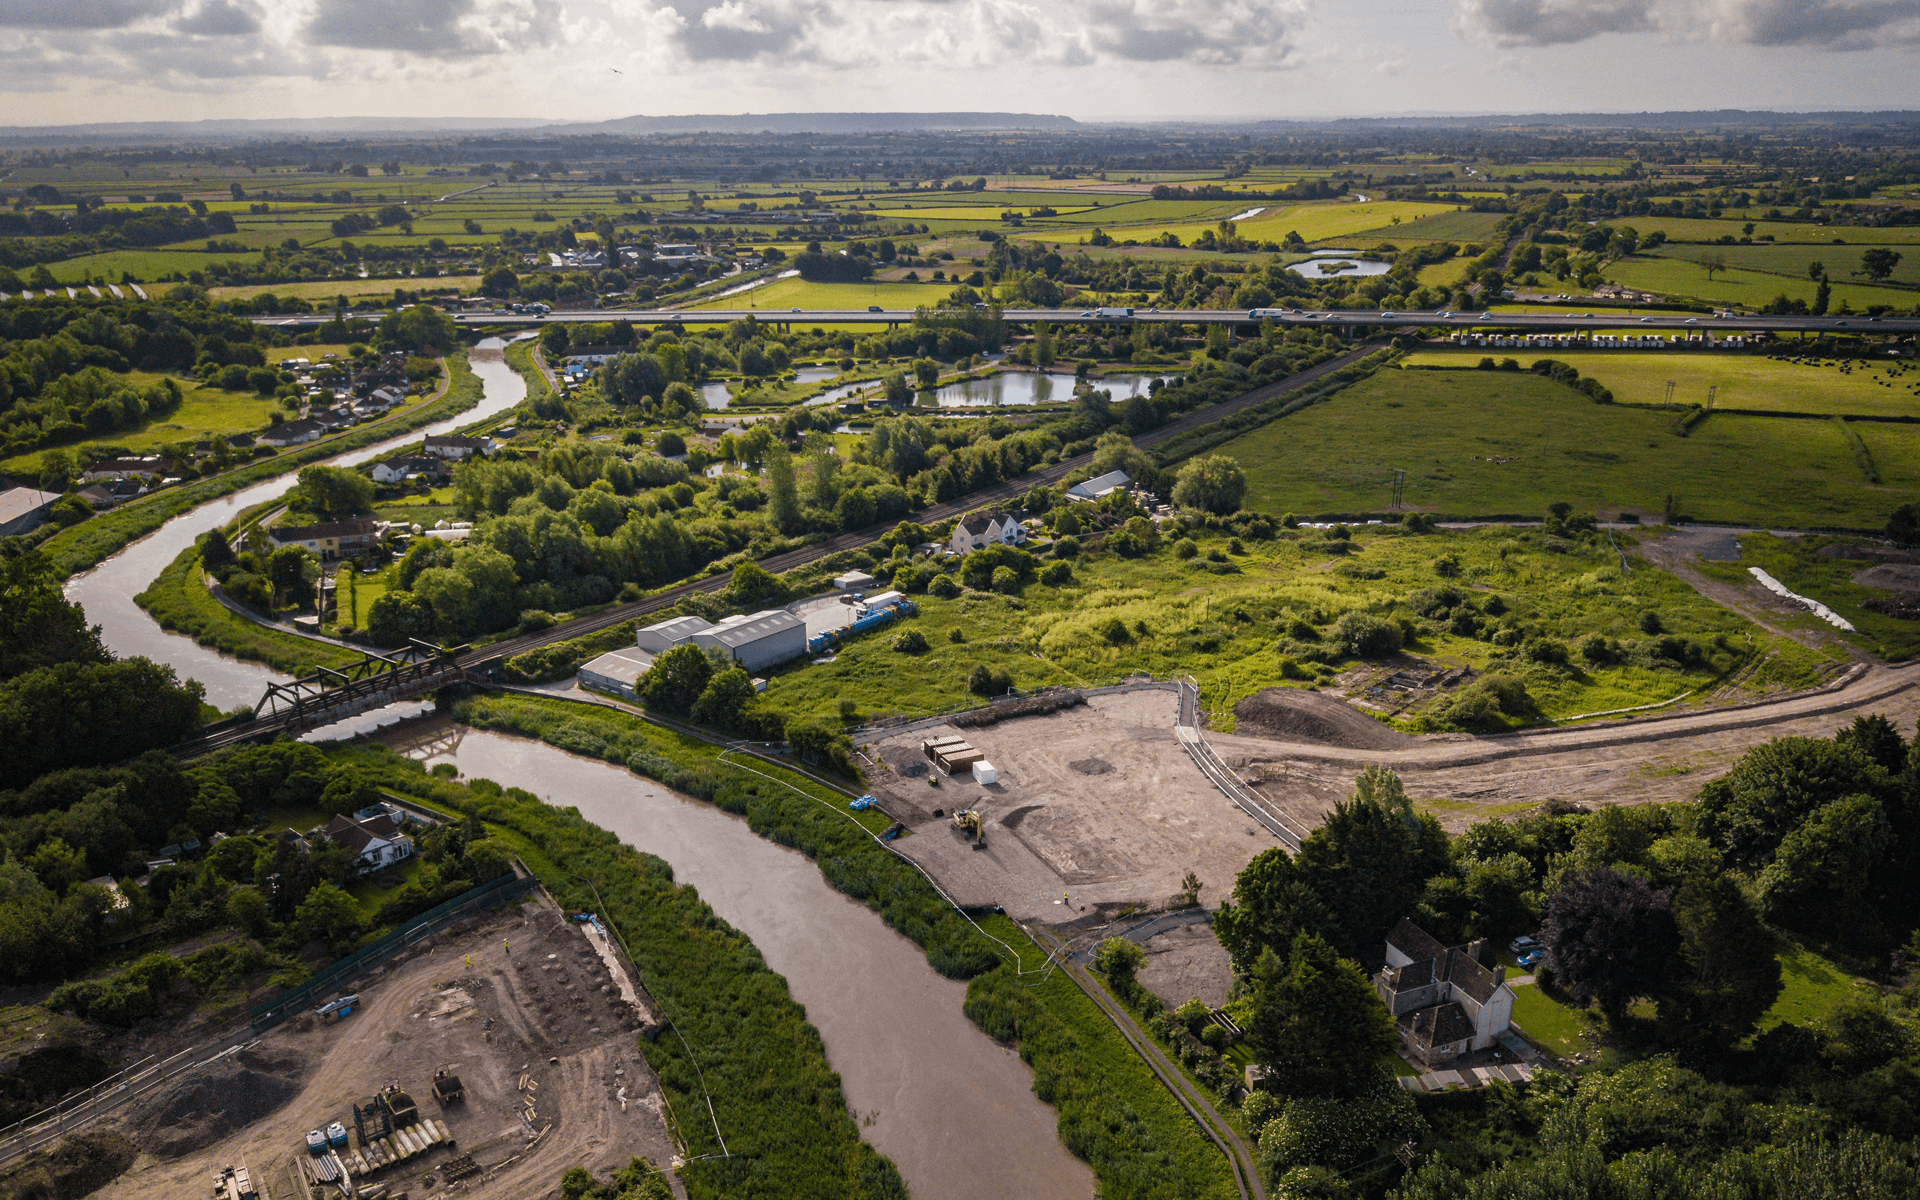 "Mavic 2 Pro" aerial drone photo of "Whitemountain" building a bridge and access way in Bridgwater